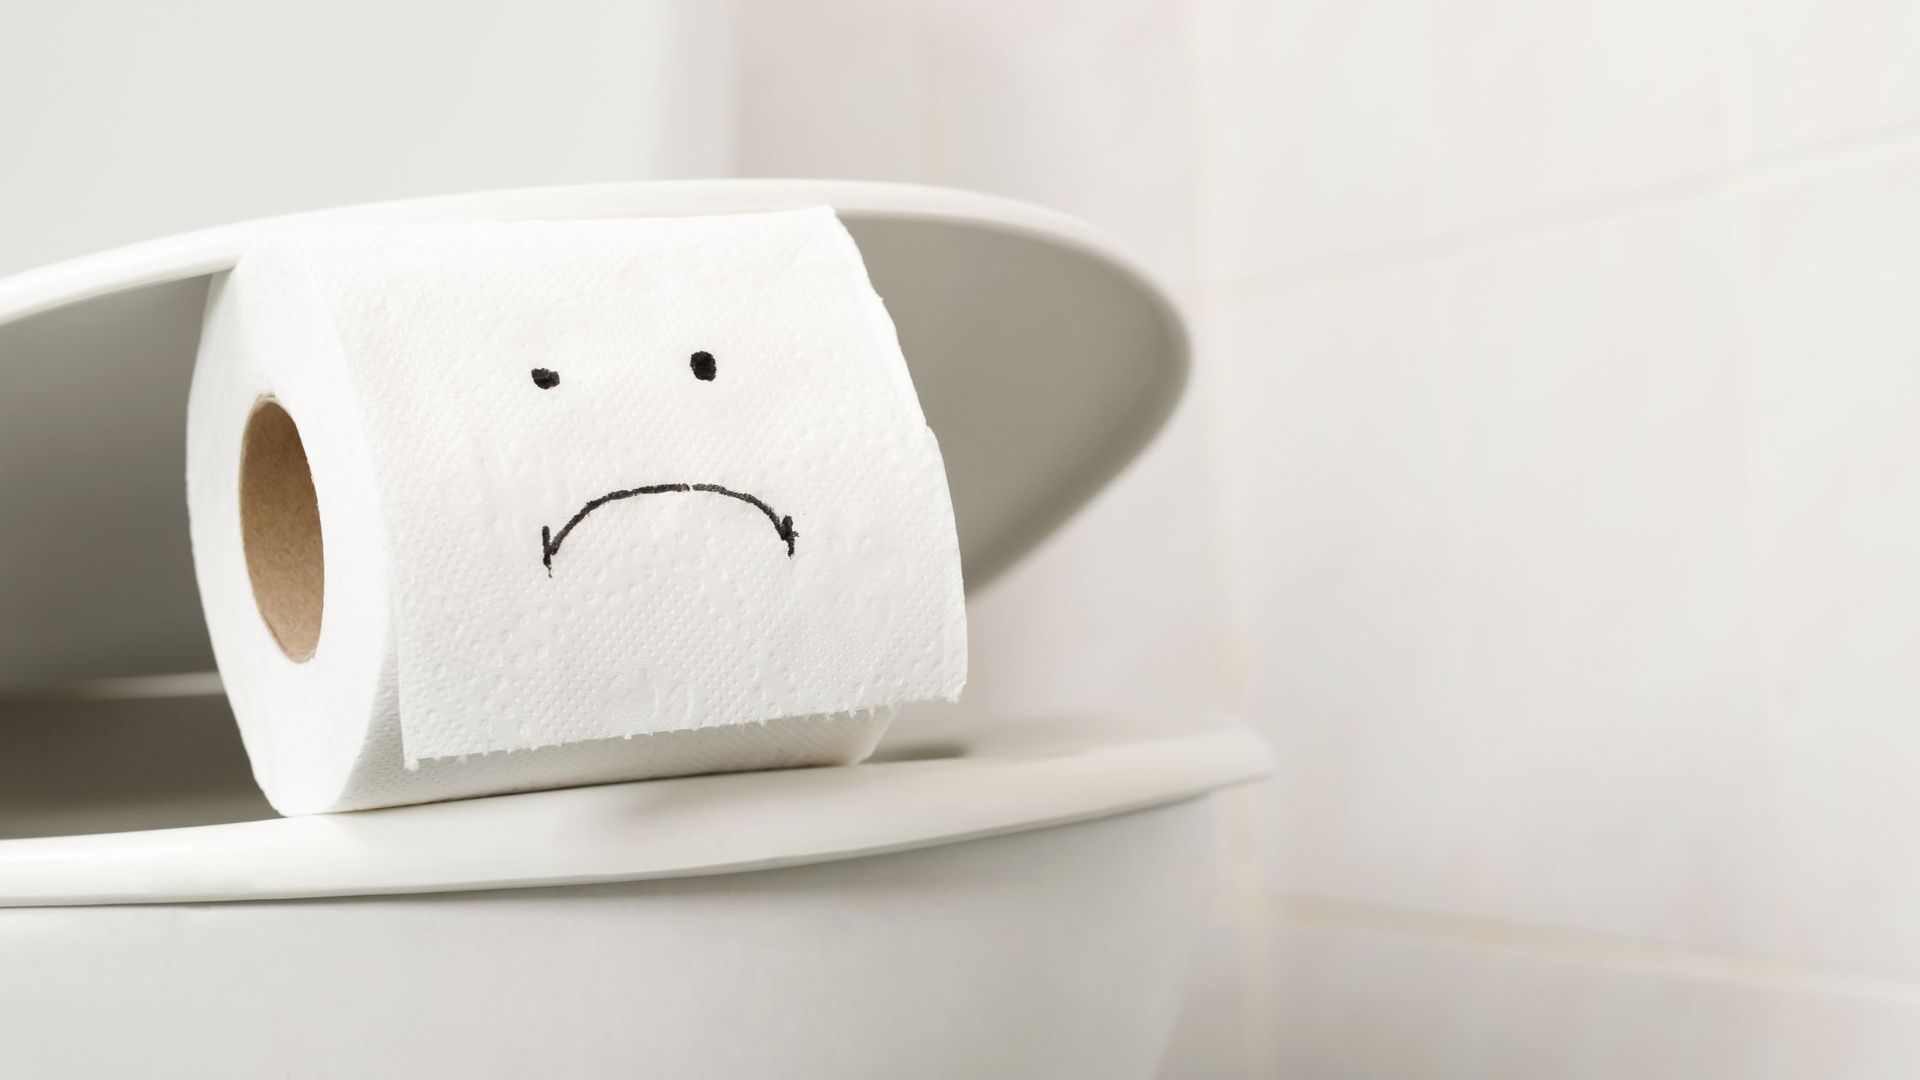 Toilet paper with an unhappy face in a broken toilet that need repairing